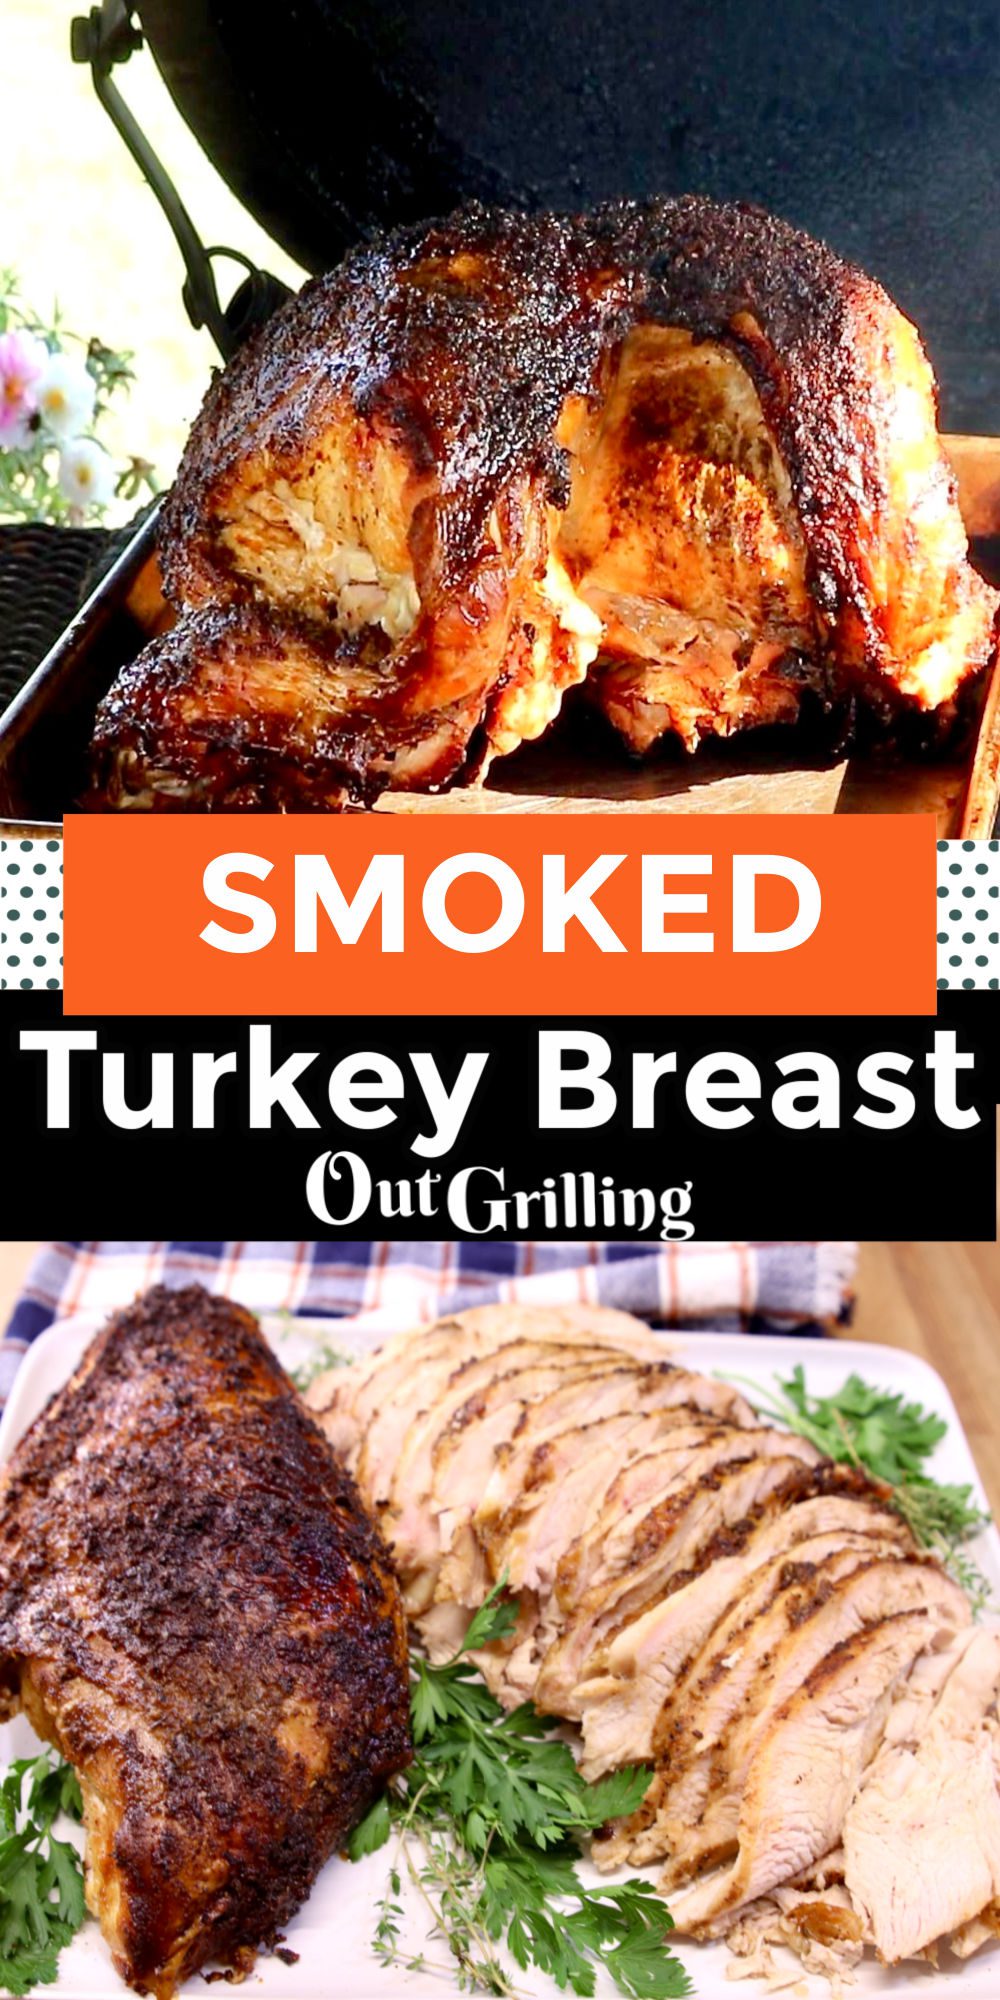 Smoked Turkey Breast - Out Grilling